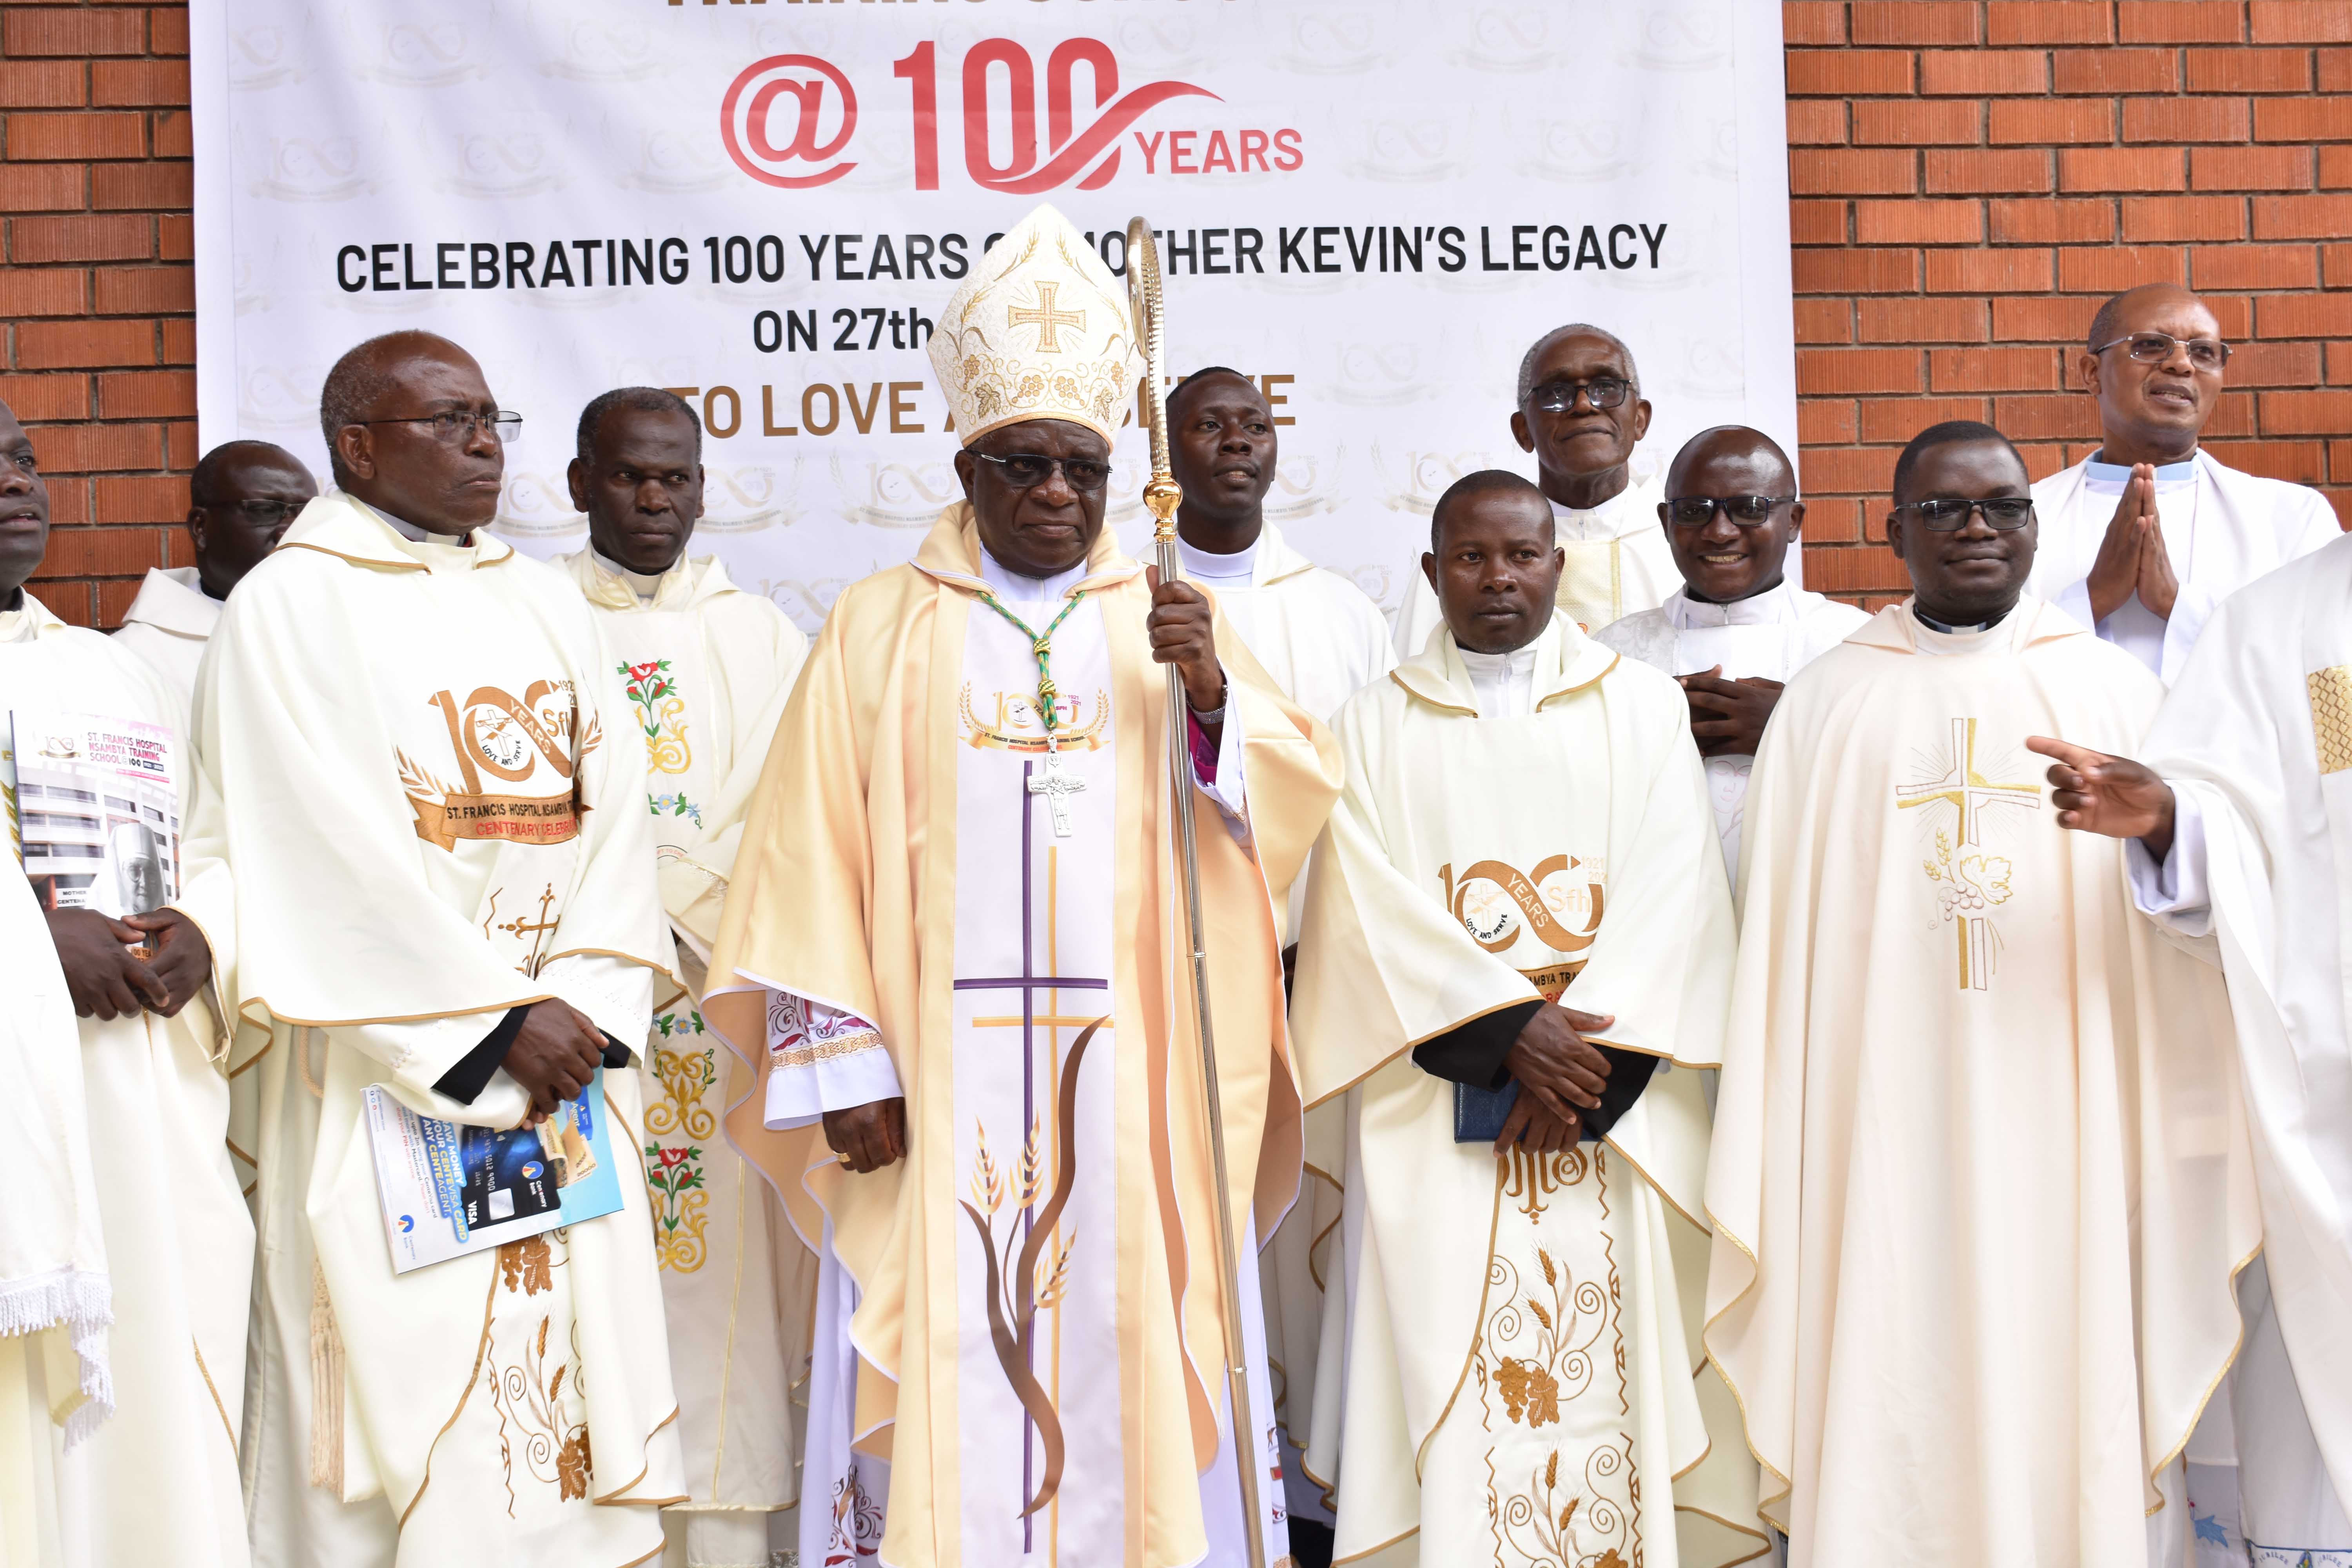 Celebrating 100 Years of Mother Kevin Legacy.